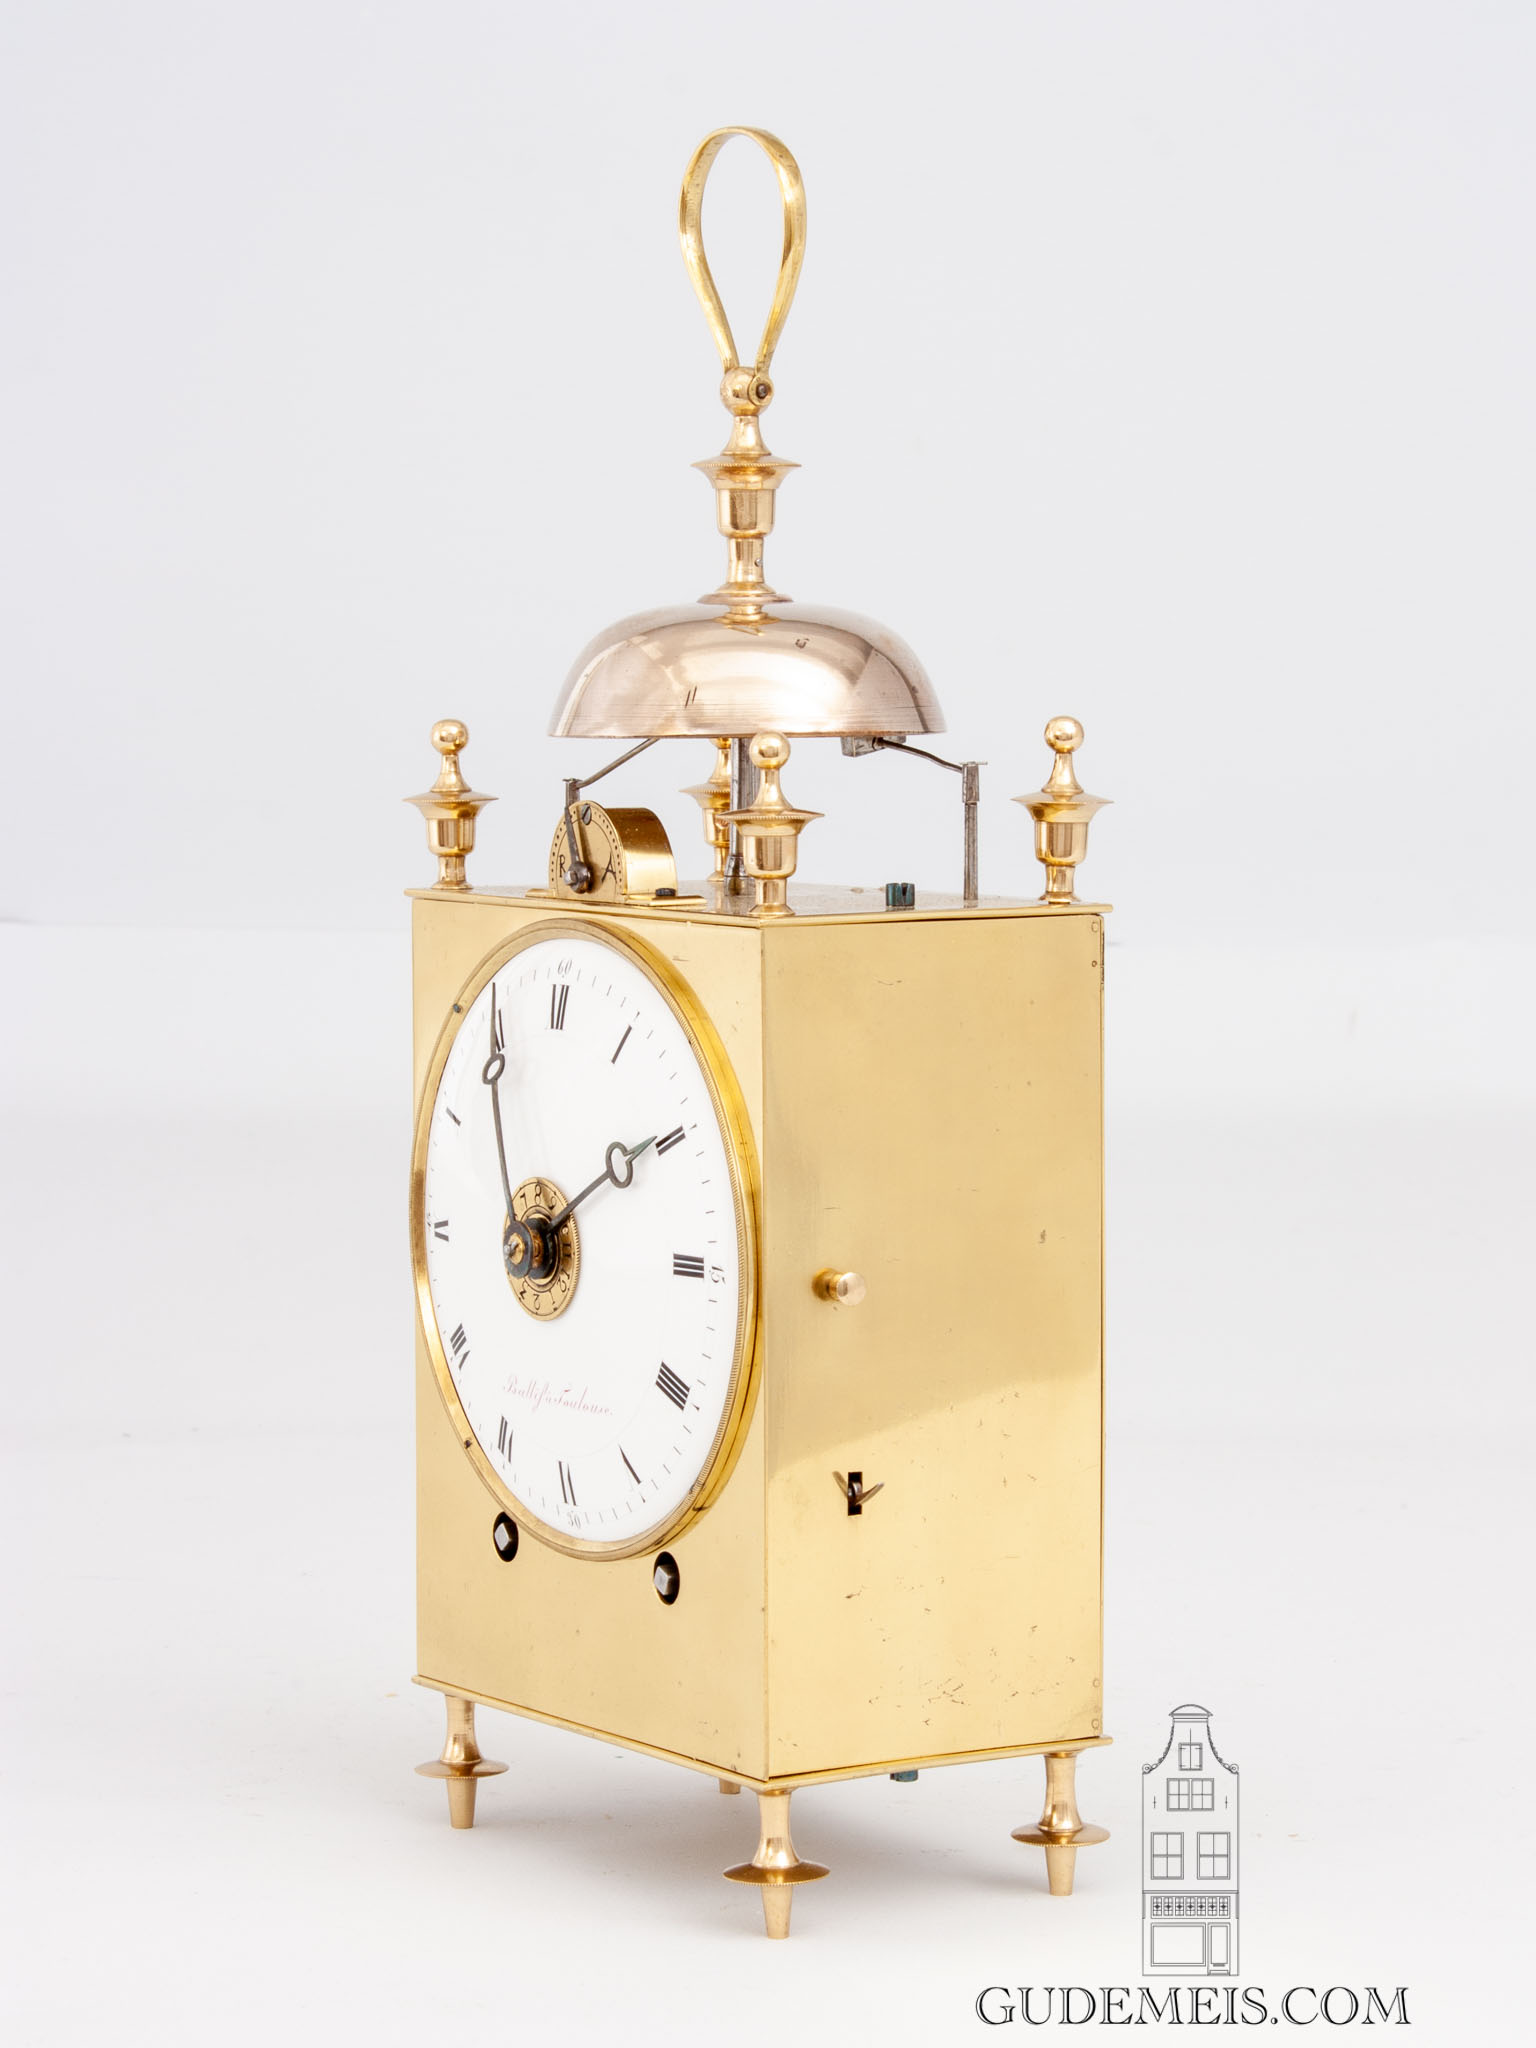 Swiss-French-Jura-brass-striking-repeating-alarm-Capucine-pendule-travel-clock-Bellif-A-Toulouse-